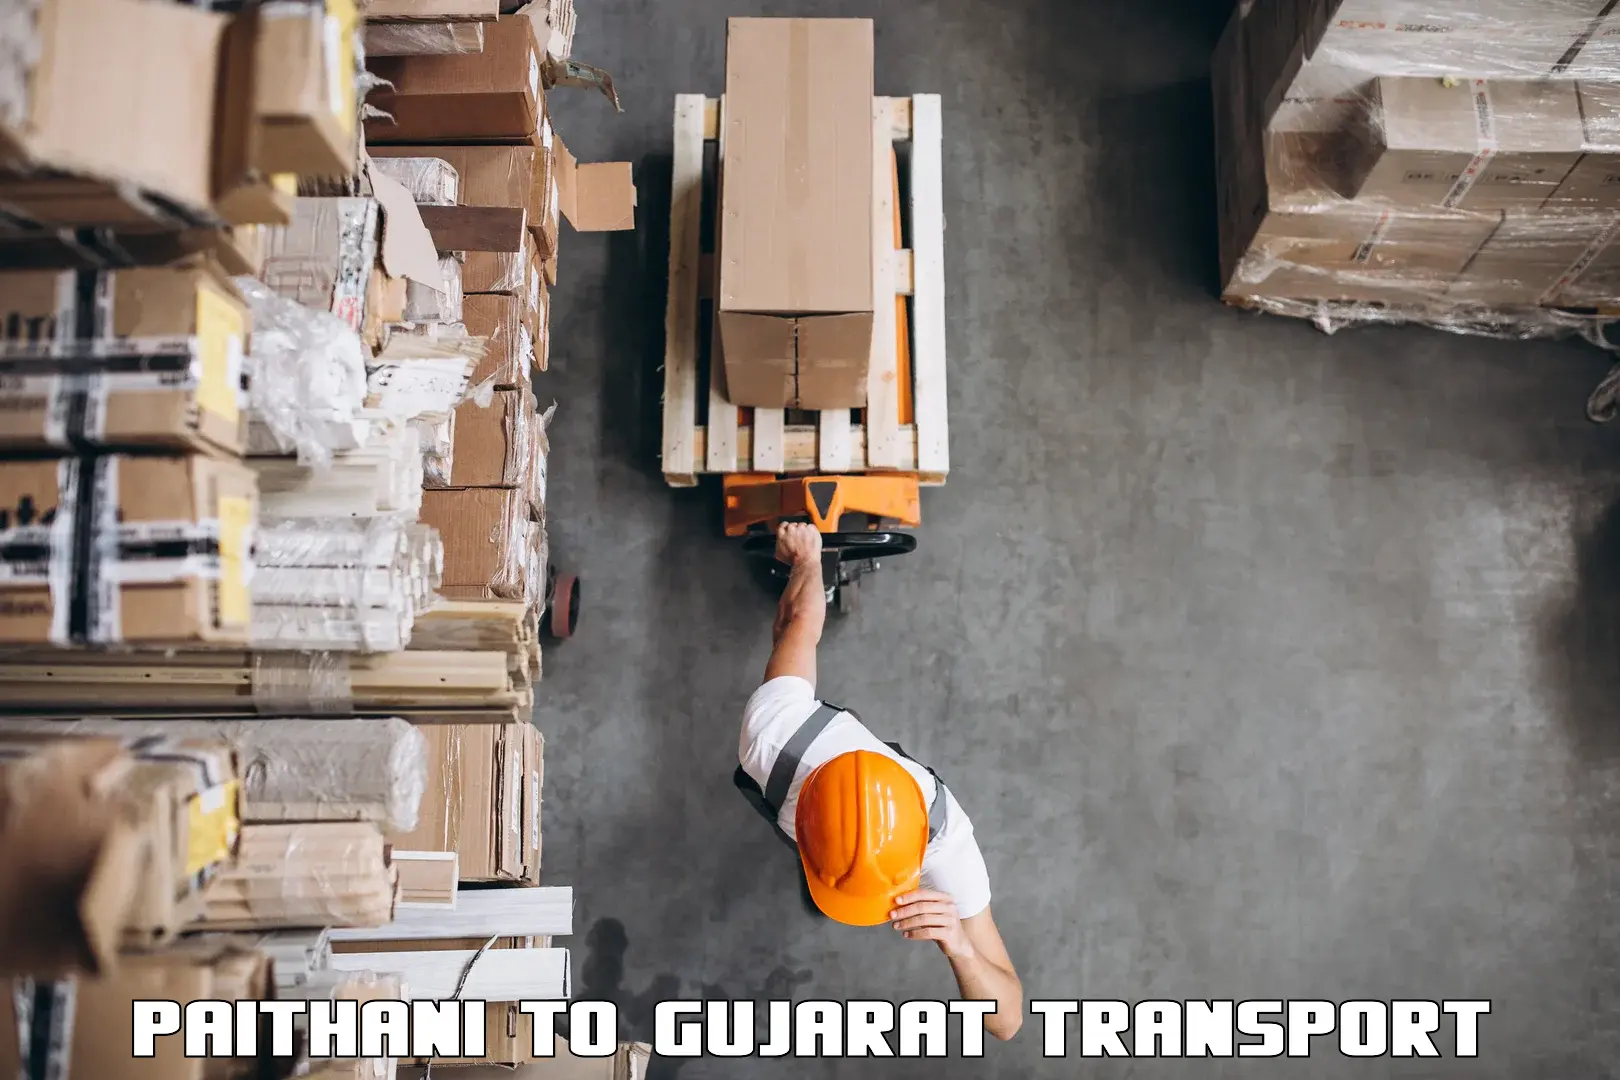 Container transport service Paithani to Bhesan